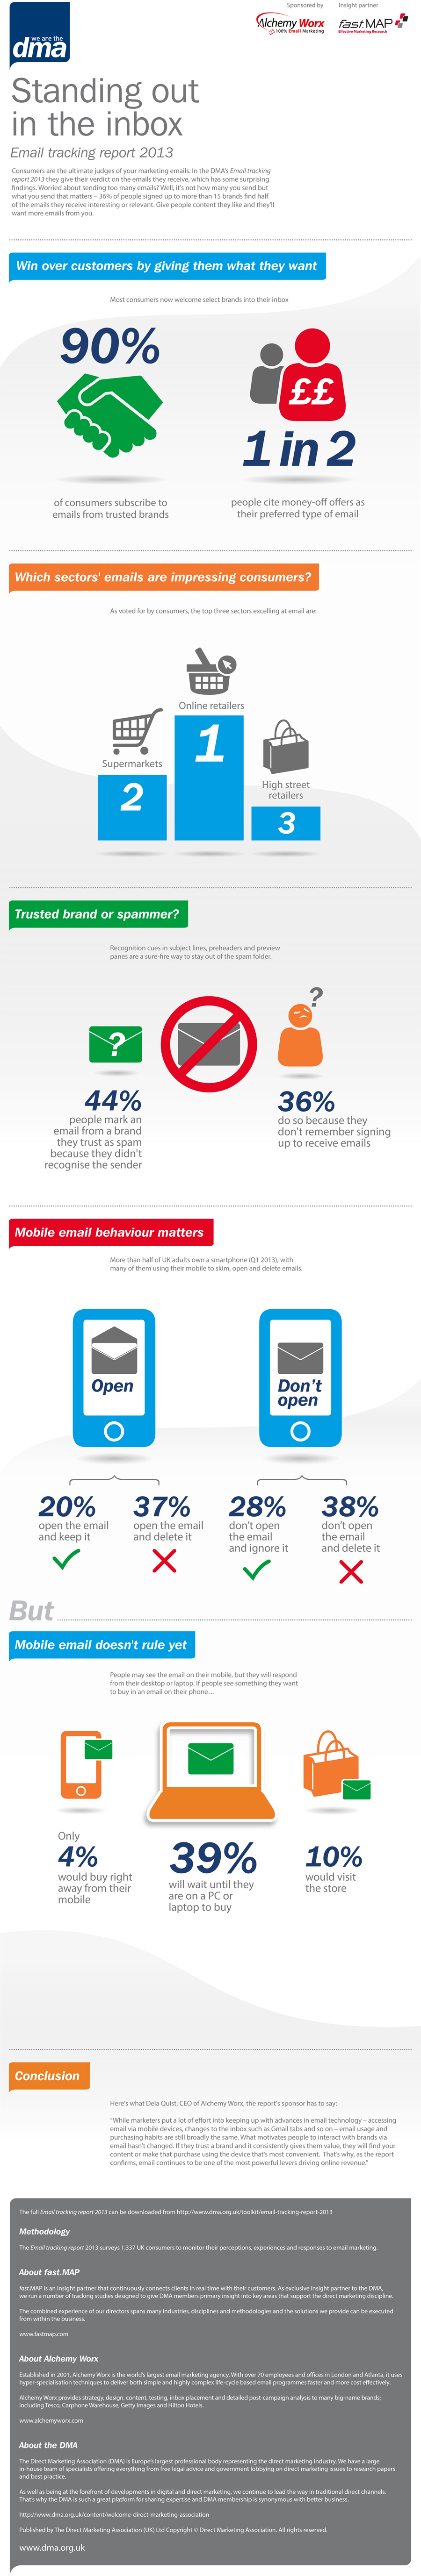 Email-tracking-report-2013-infographic copy